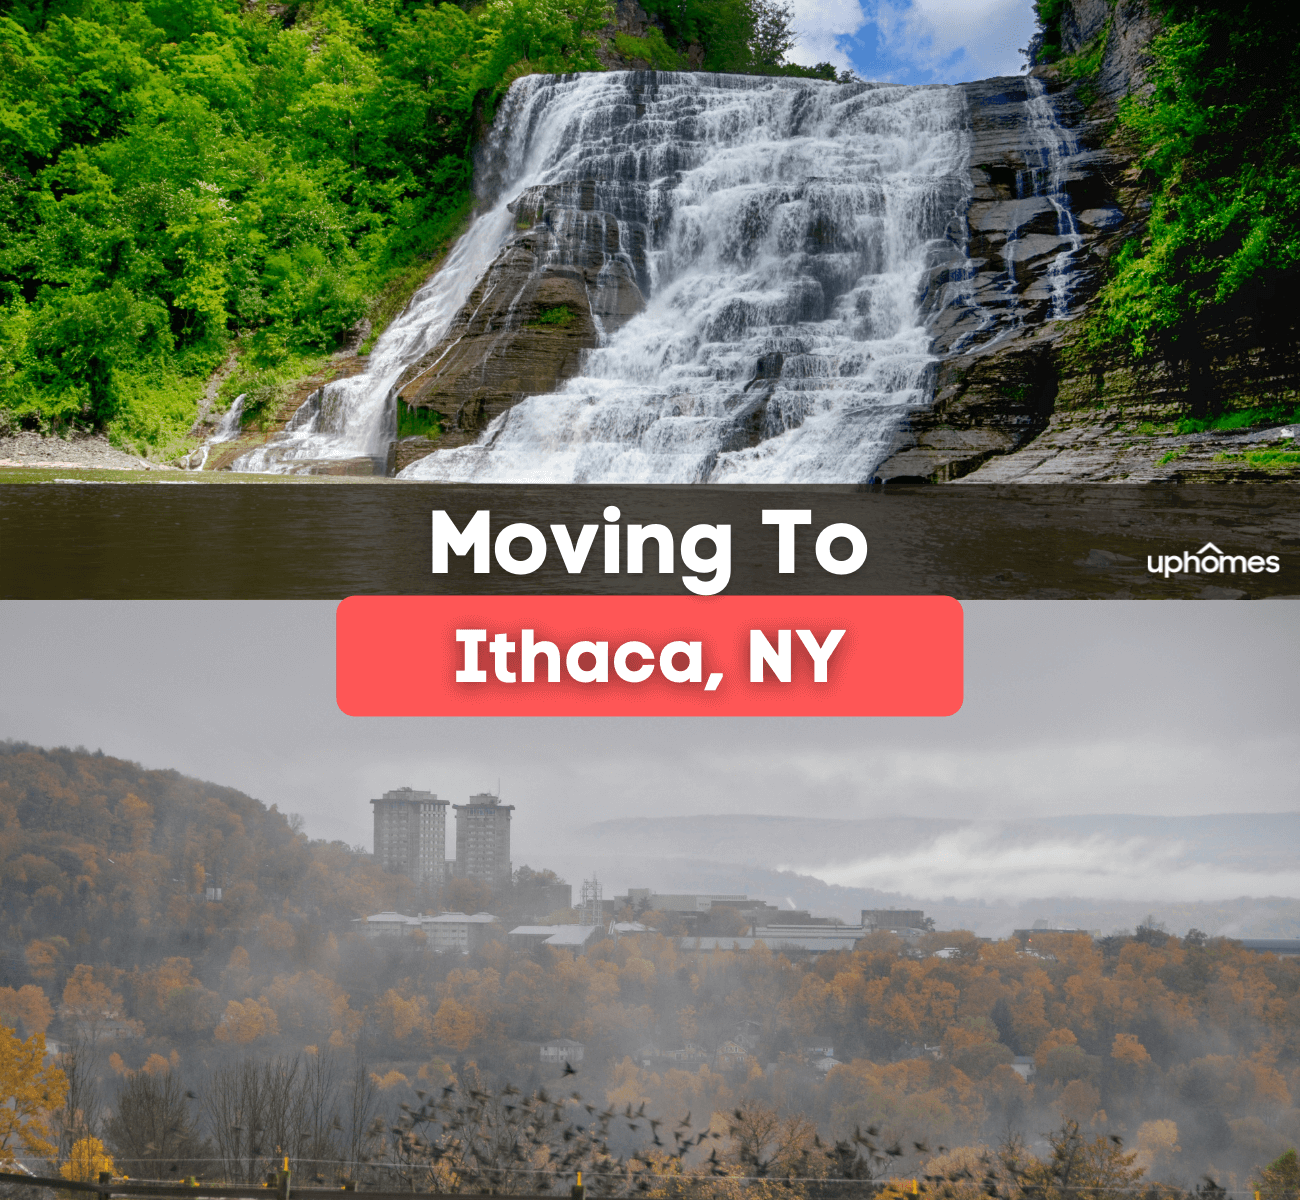 Moving to Ithaca, New York - What is it like living in Ithaca, NY?